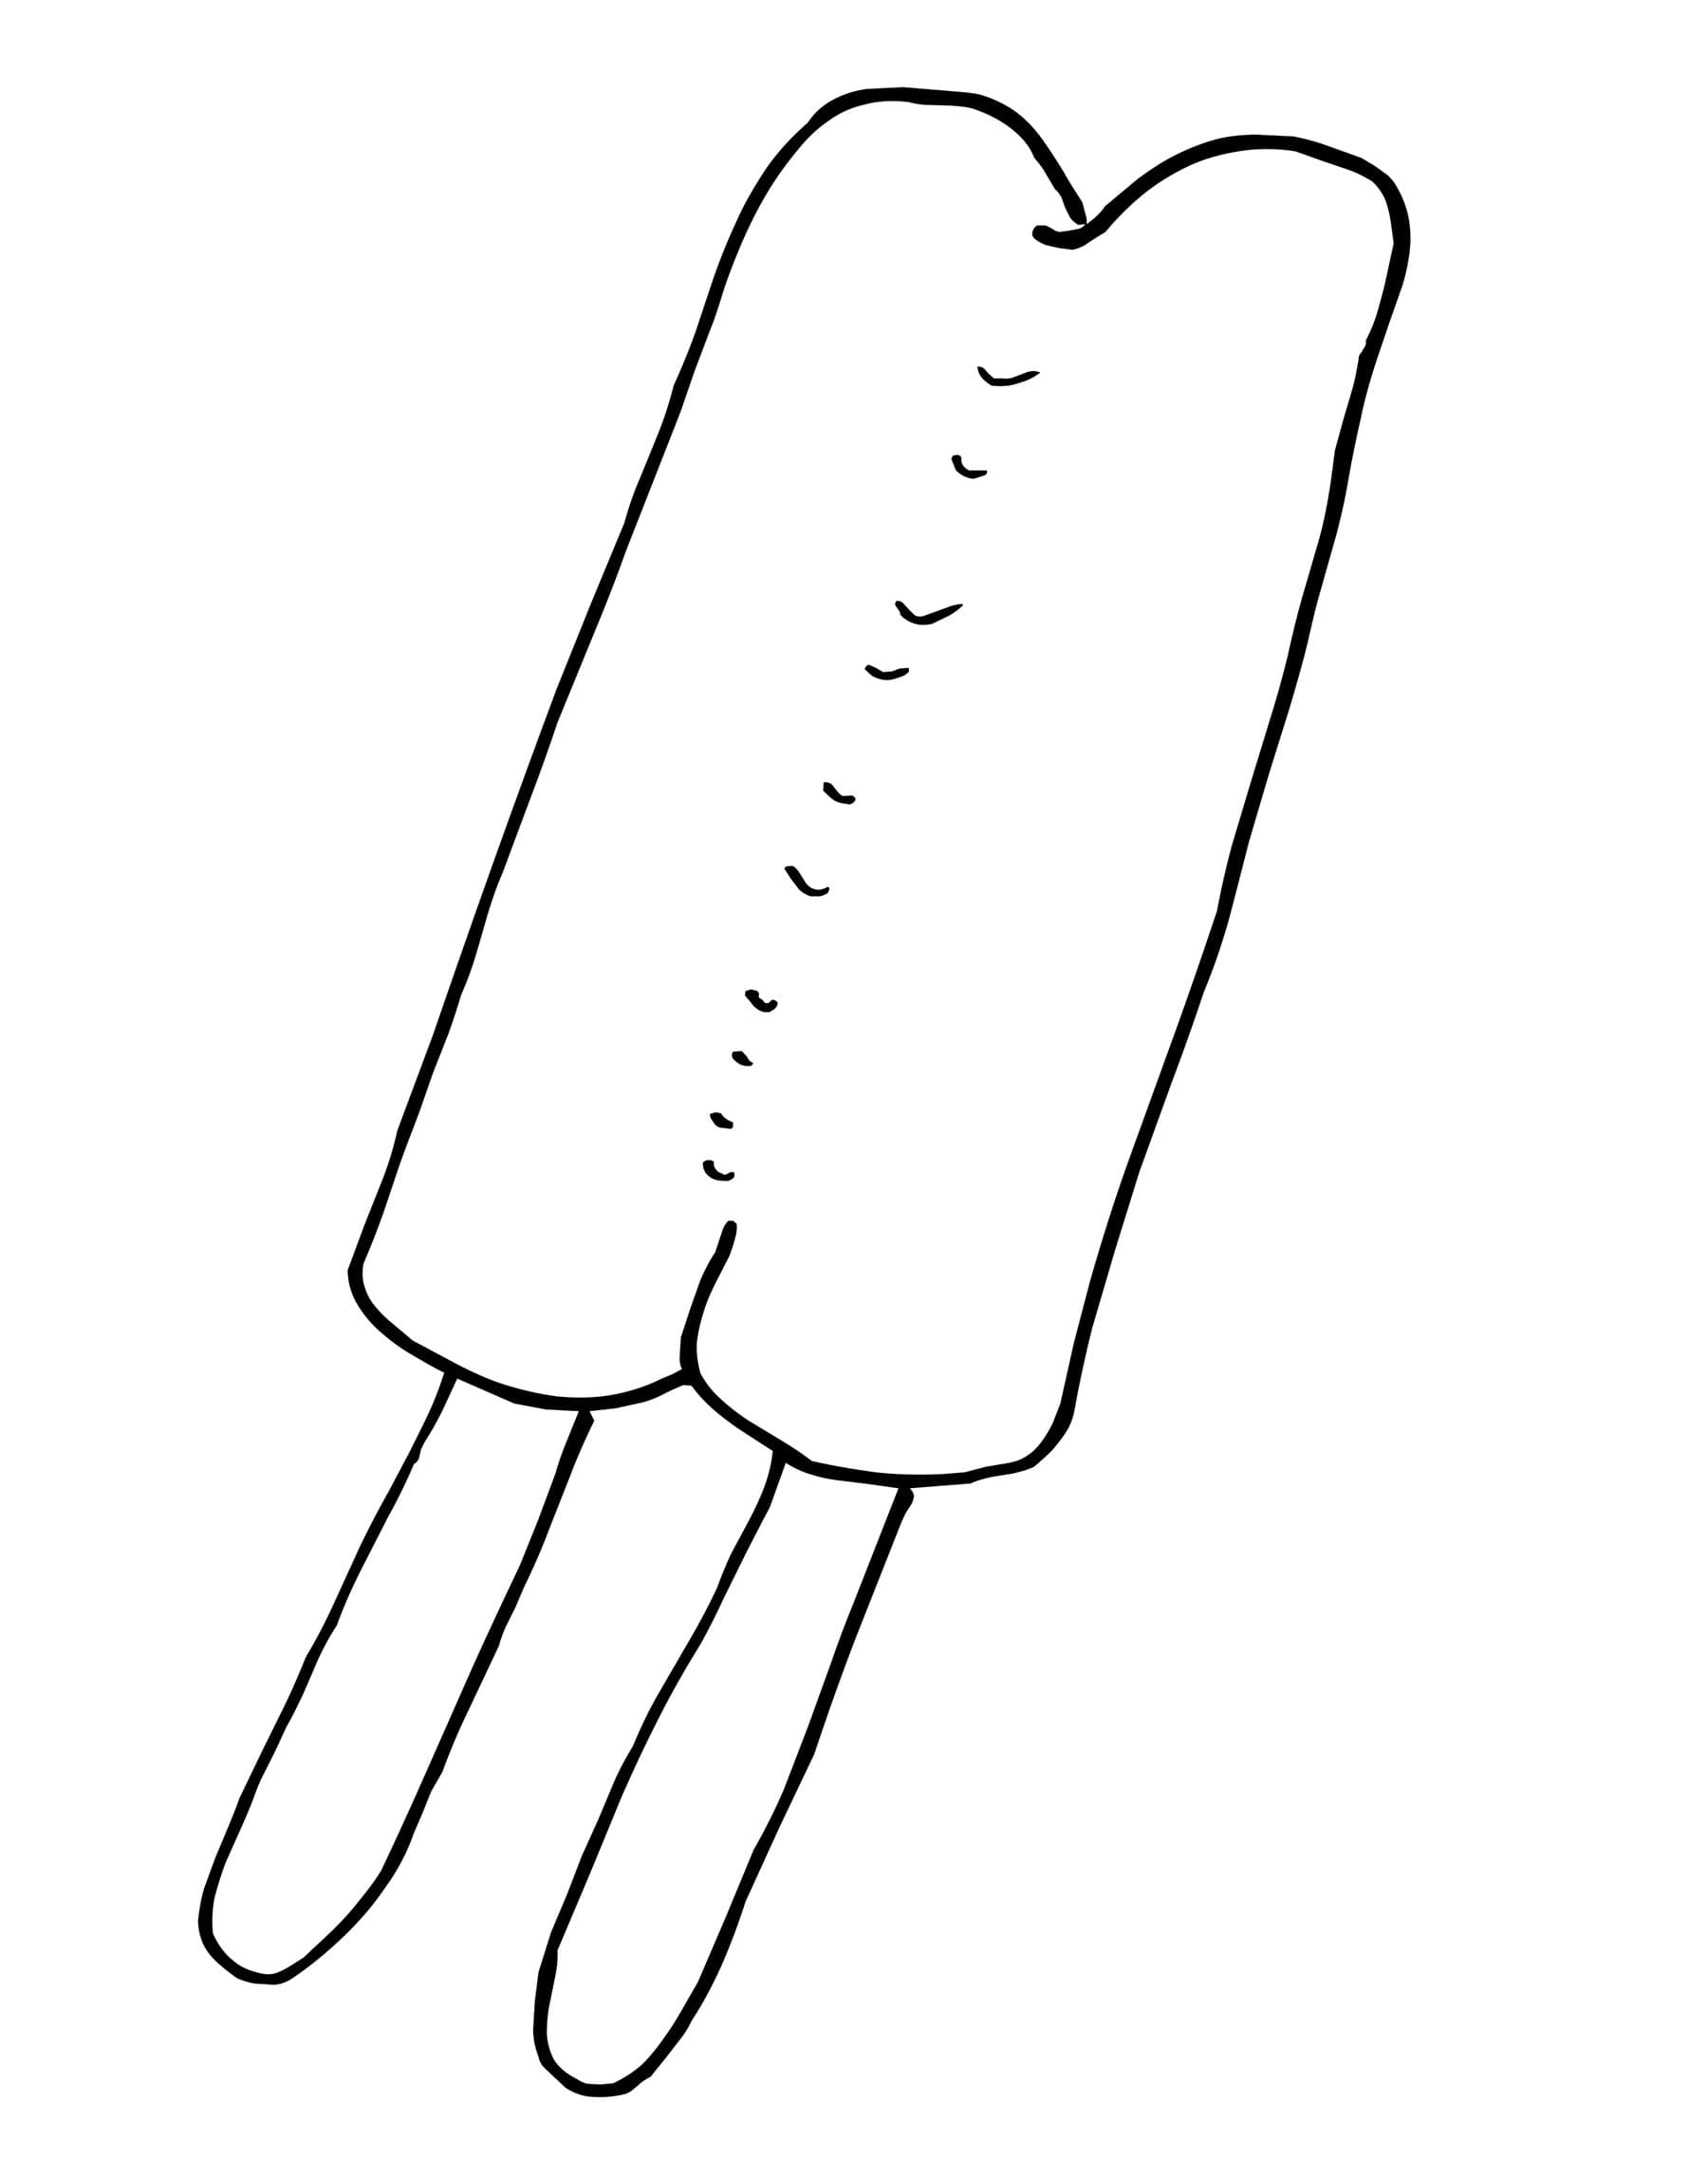 Ice Cream And Popsicle Image